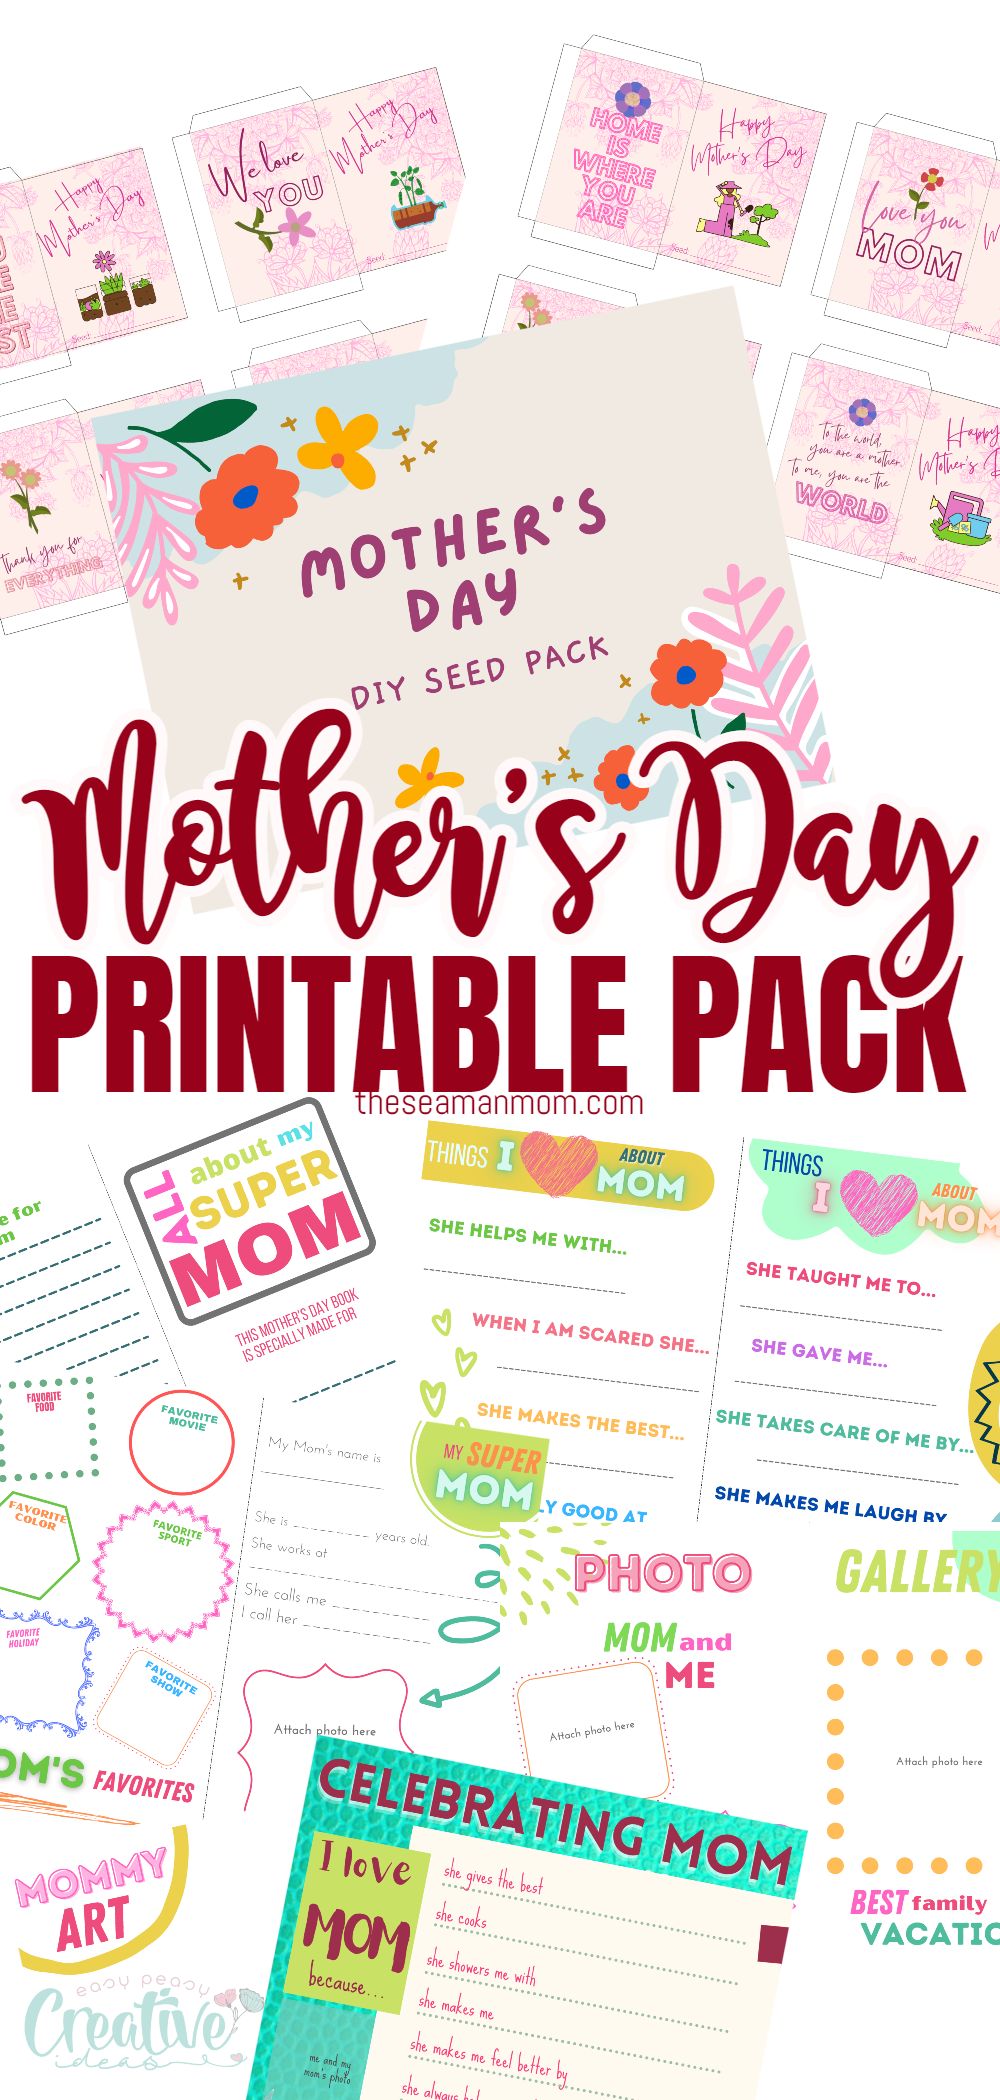 With this wonderful pack for pretty Mother’s Day printables, kids can create an adorable gift for mom in a matter of minutes! via @petroneagu